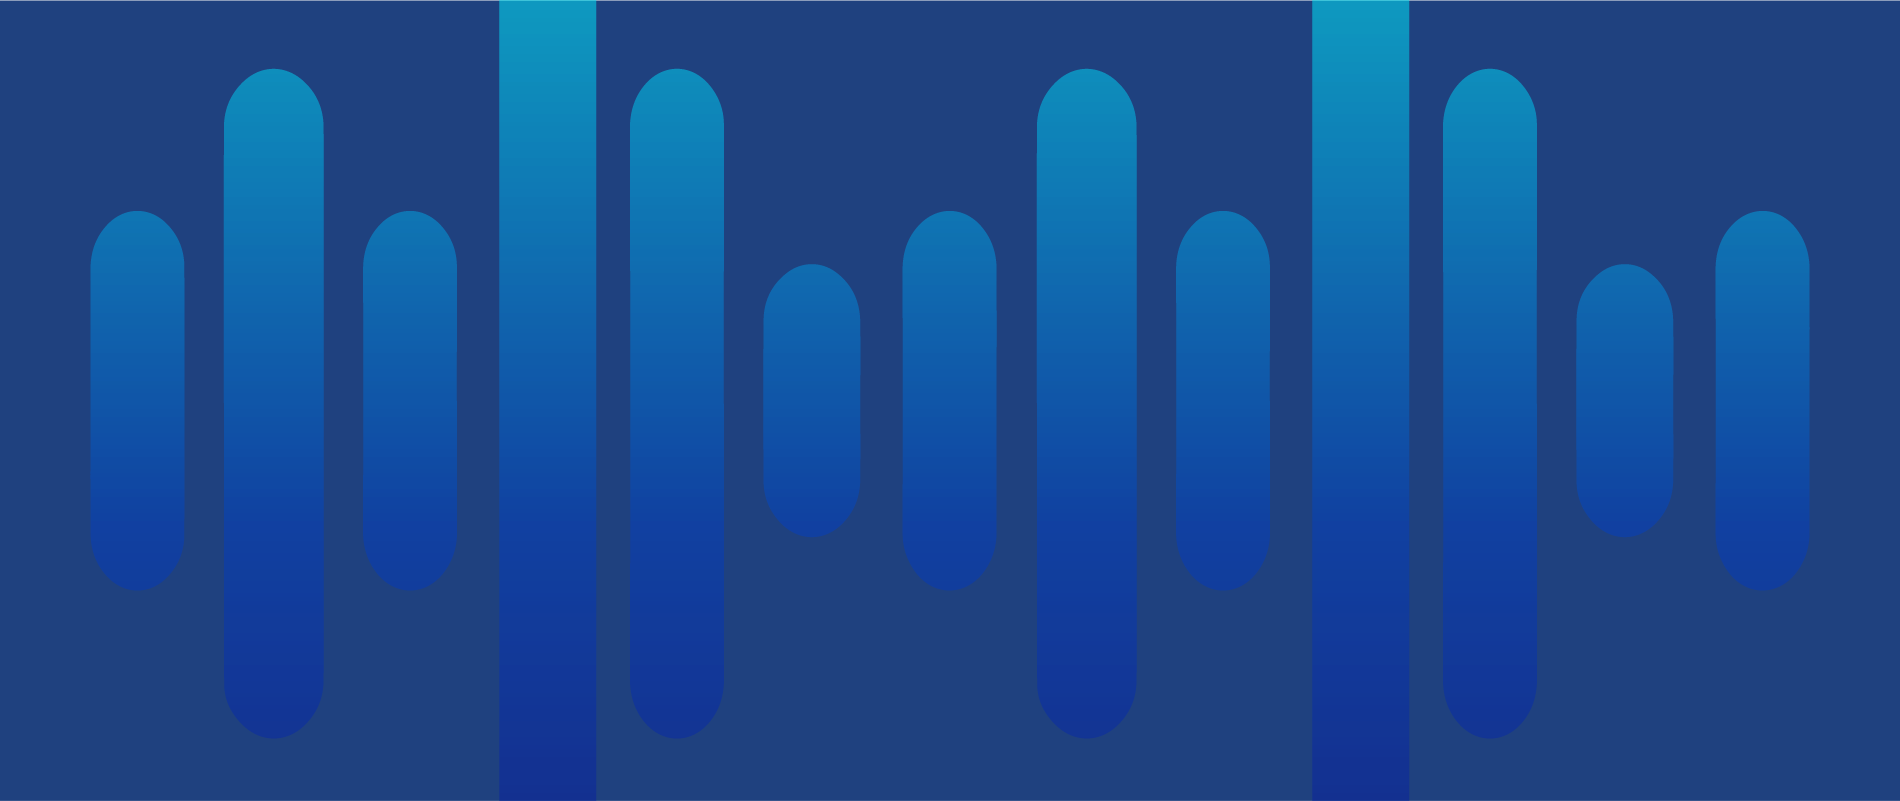 Blue background with blue gradient sound wave cylinders